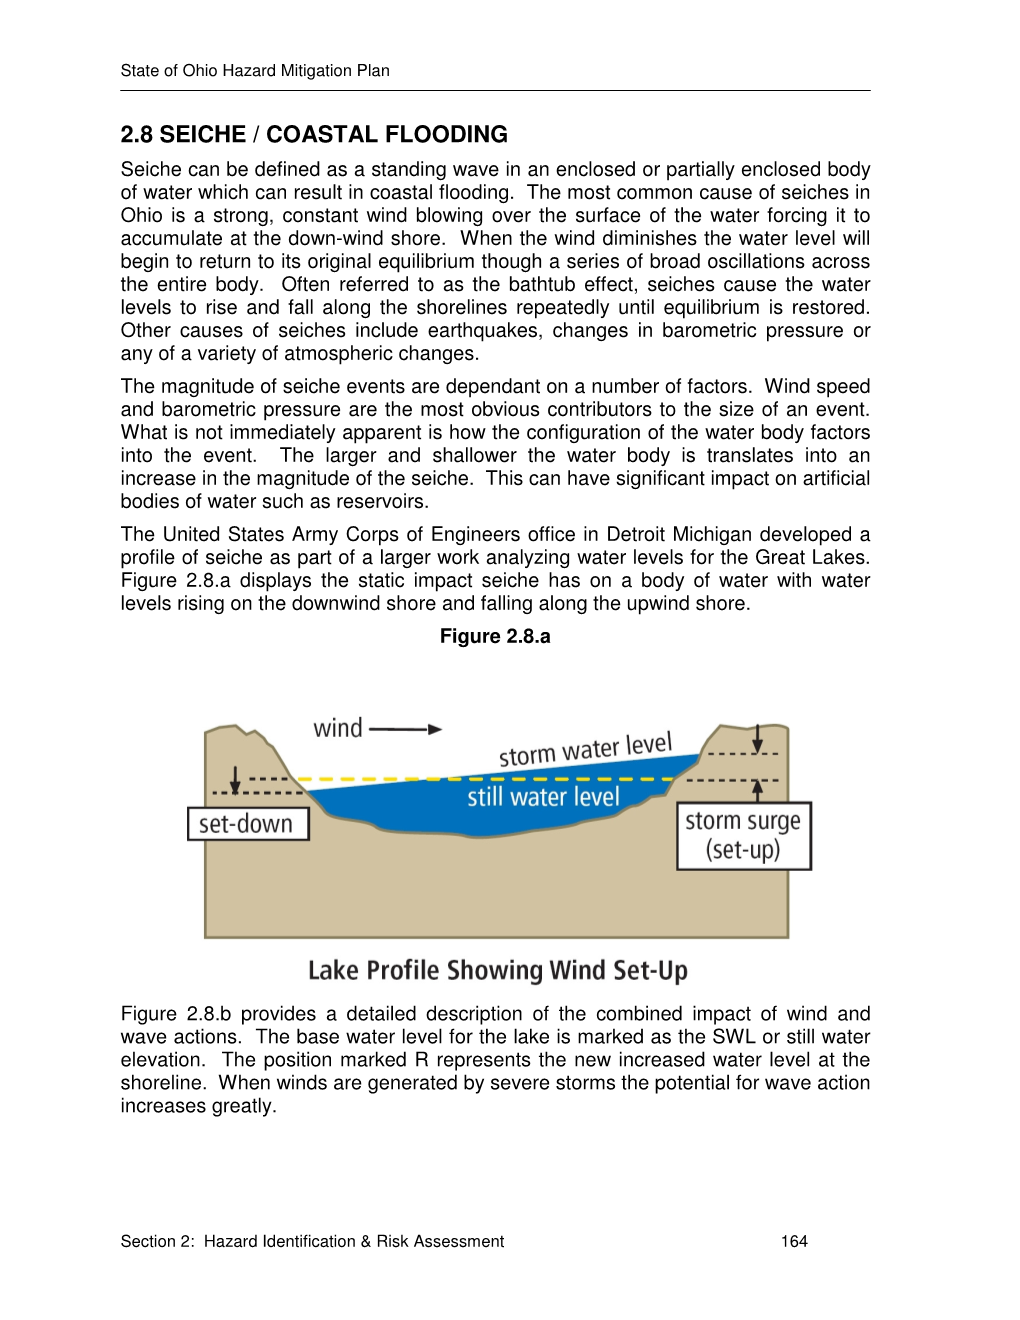 2.8 SEICHE / COASTAL FLOODING Seiche Can Be Defined As a Standing Wave in an Enclosed Or Partially Enclosed Body of Water Which Can Result in Coastal Flooding